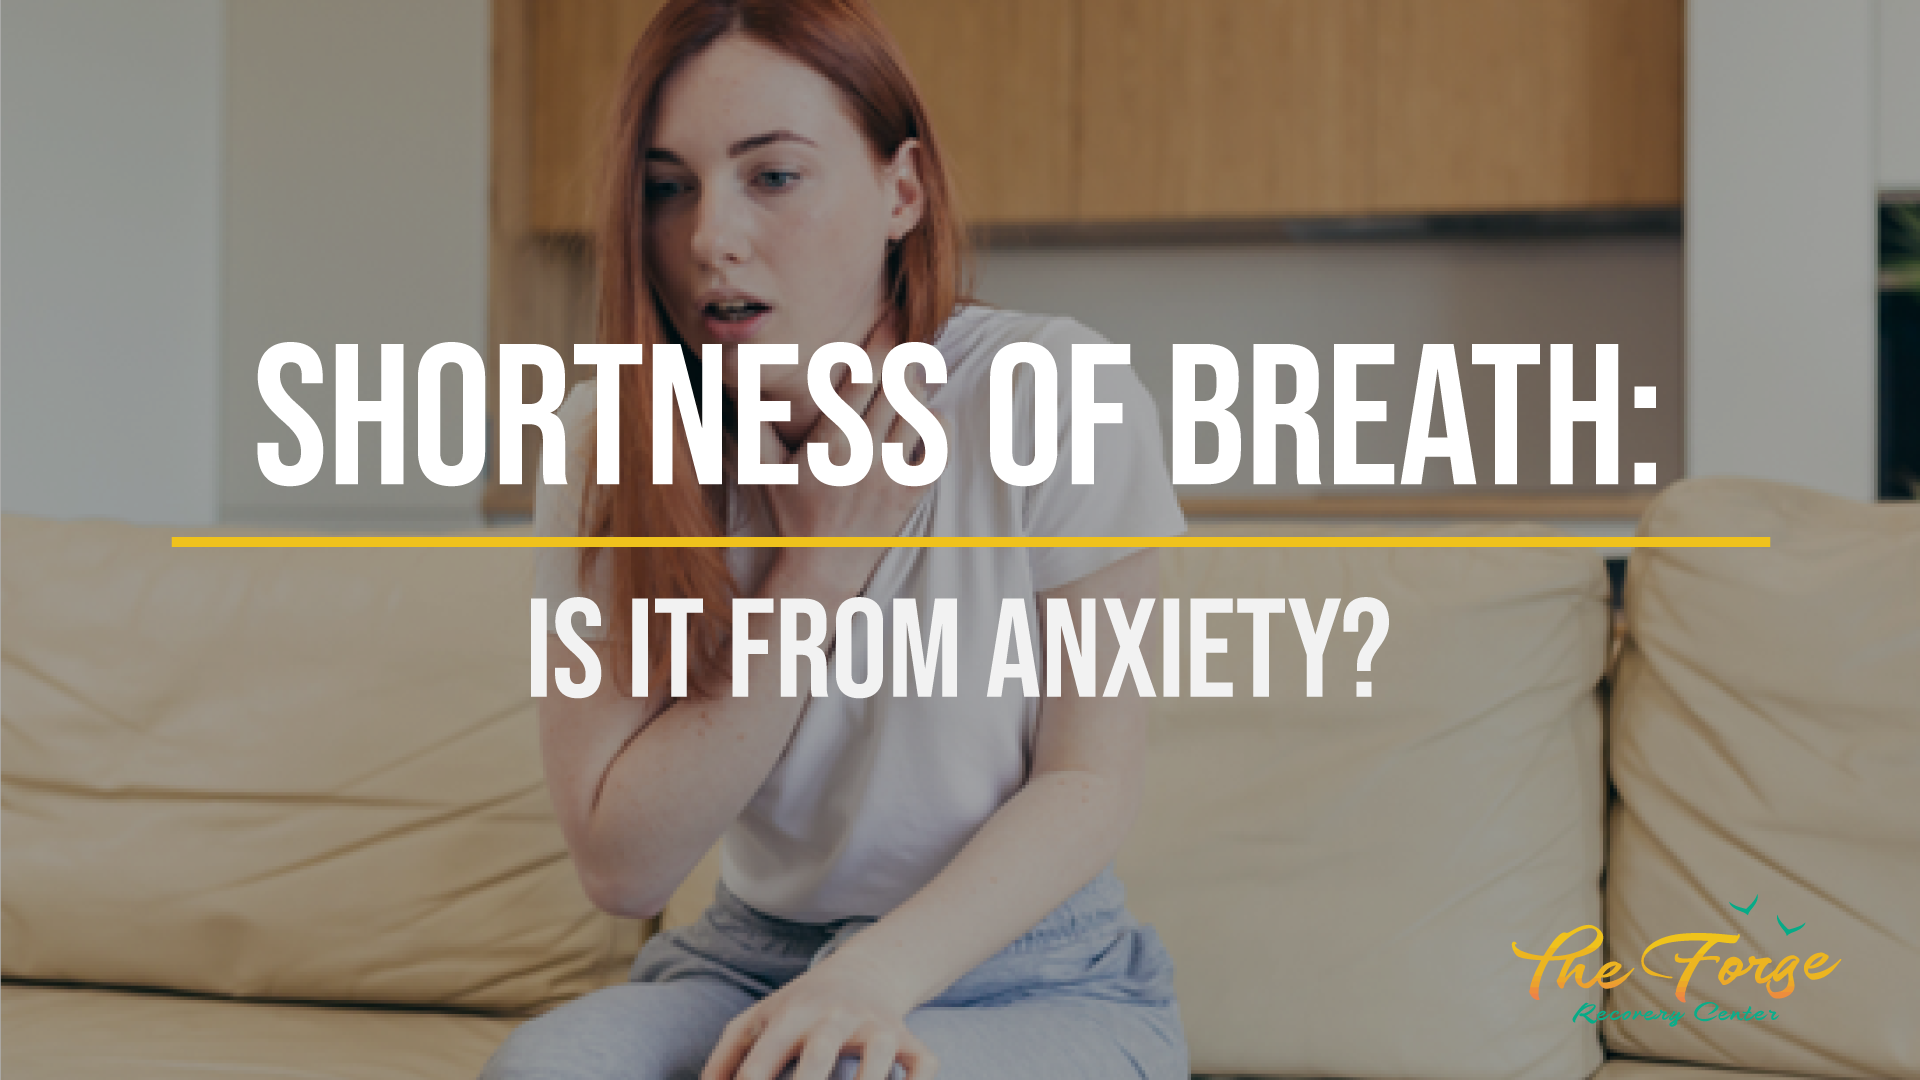 Can Anxiety Give You Shortness of Breath? We Answer This Question and More